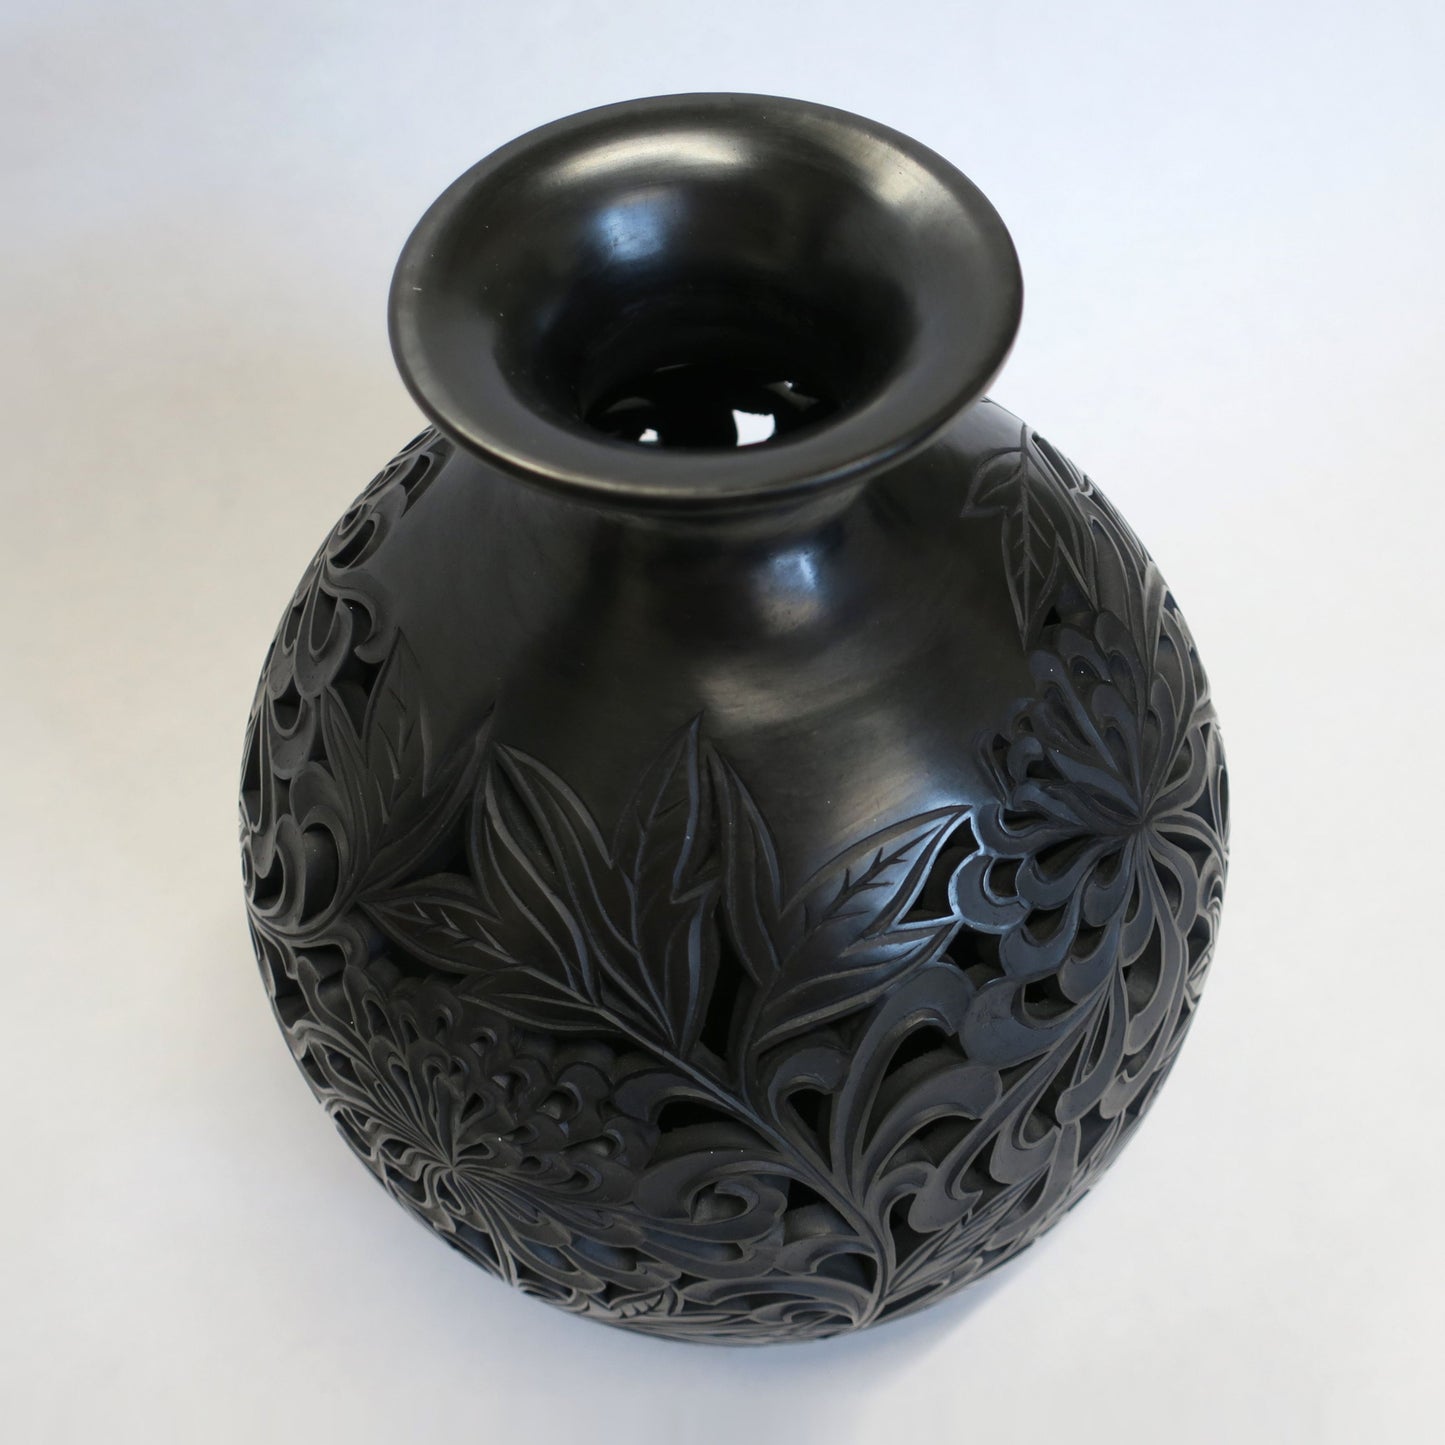 Traditional Chinese Handcrafted Black Clay - Flowers - Homeware - Lavender Home London